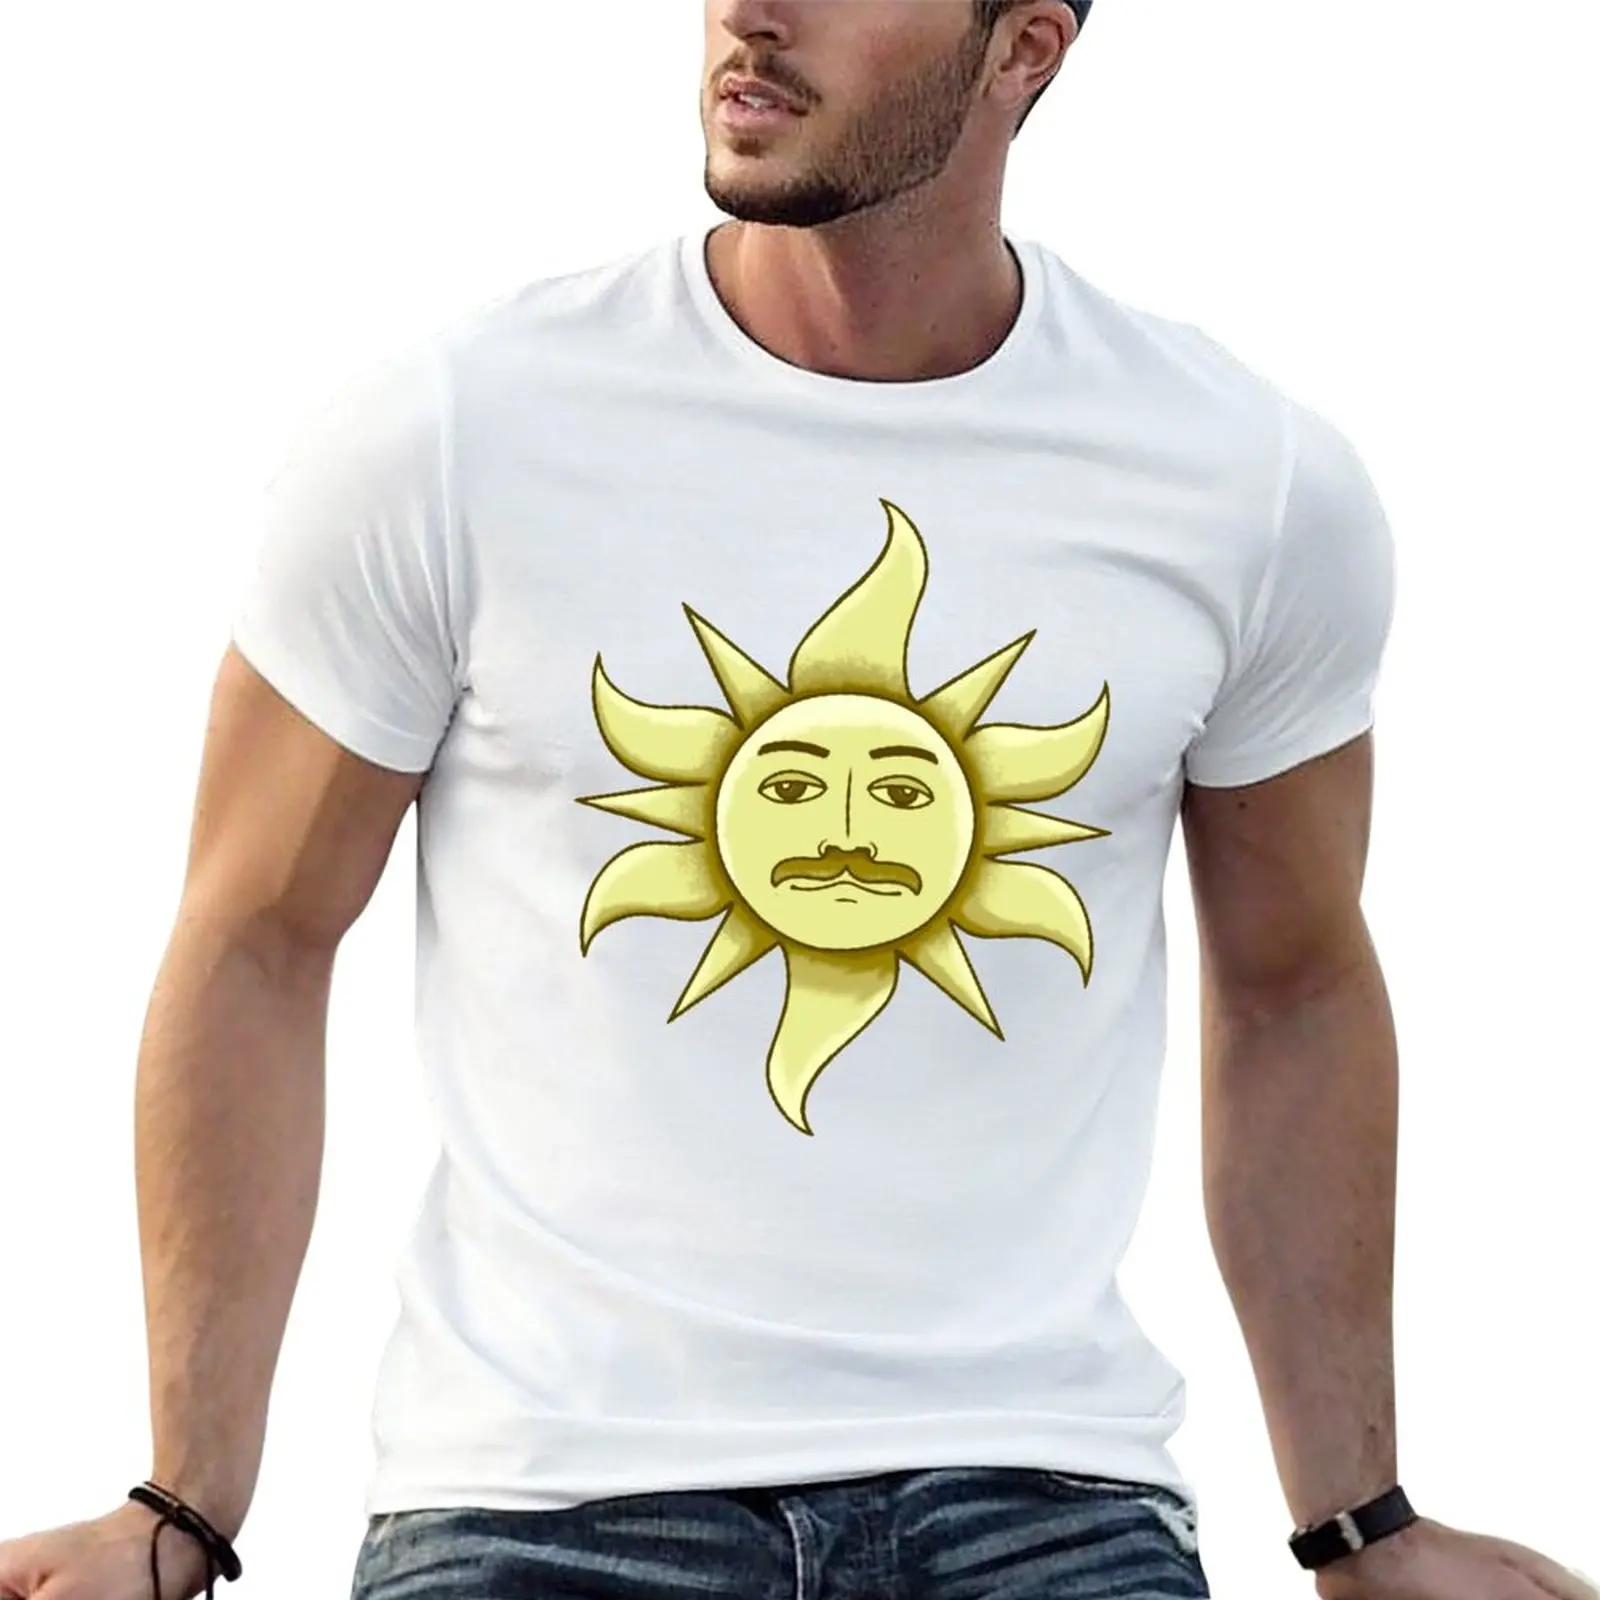 

New King Arthur's Sun T-Shirt graphic t shirts summer top slim fit t shirts for men